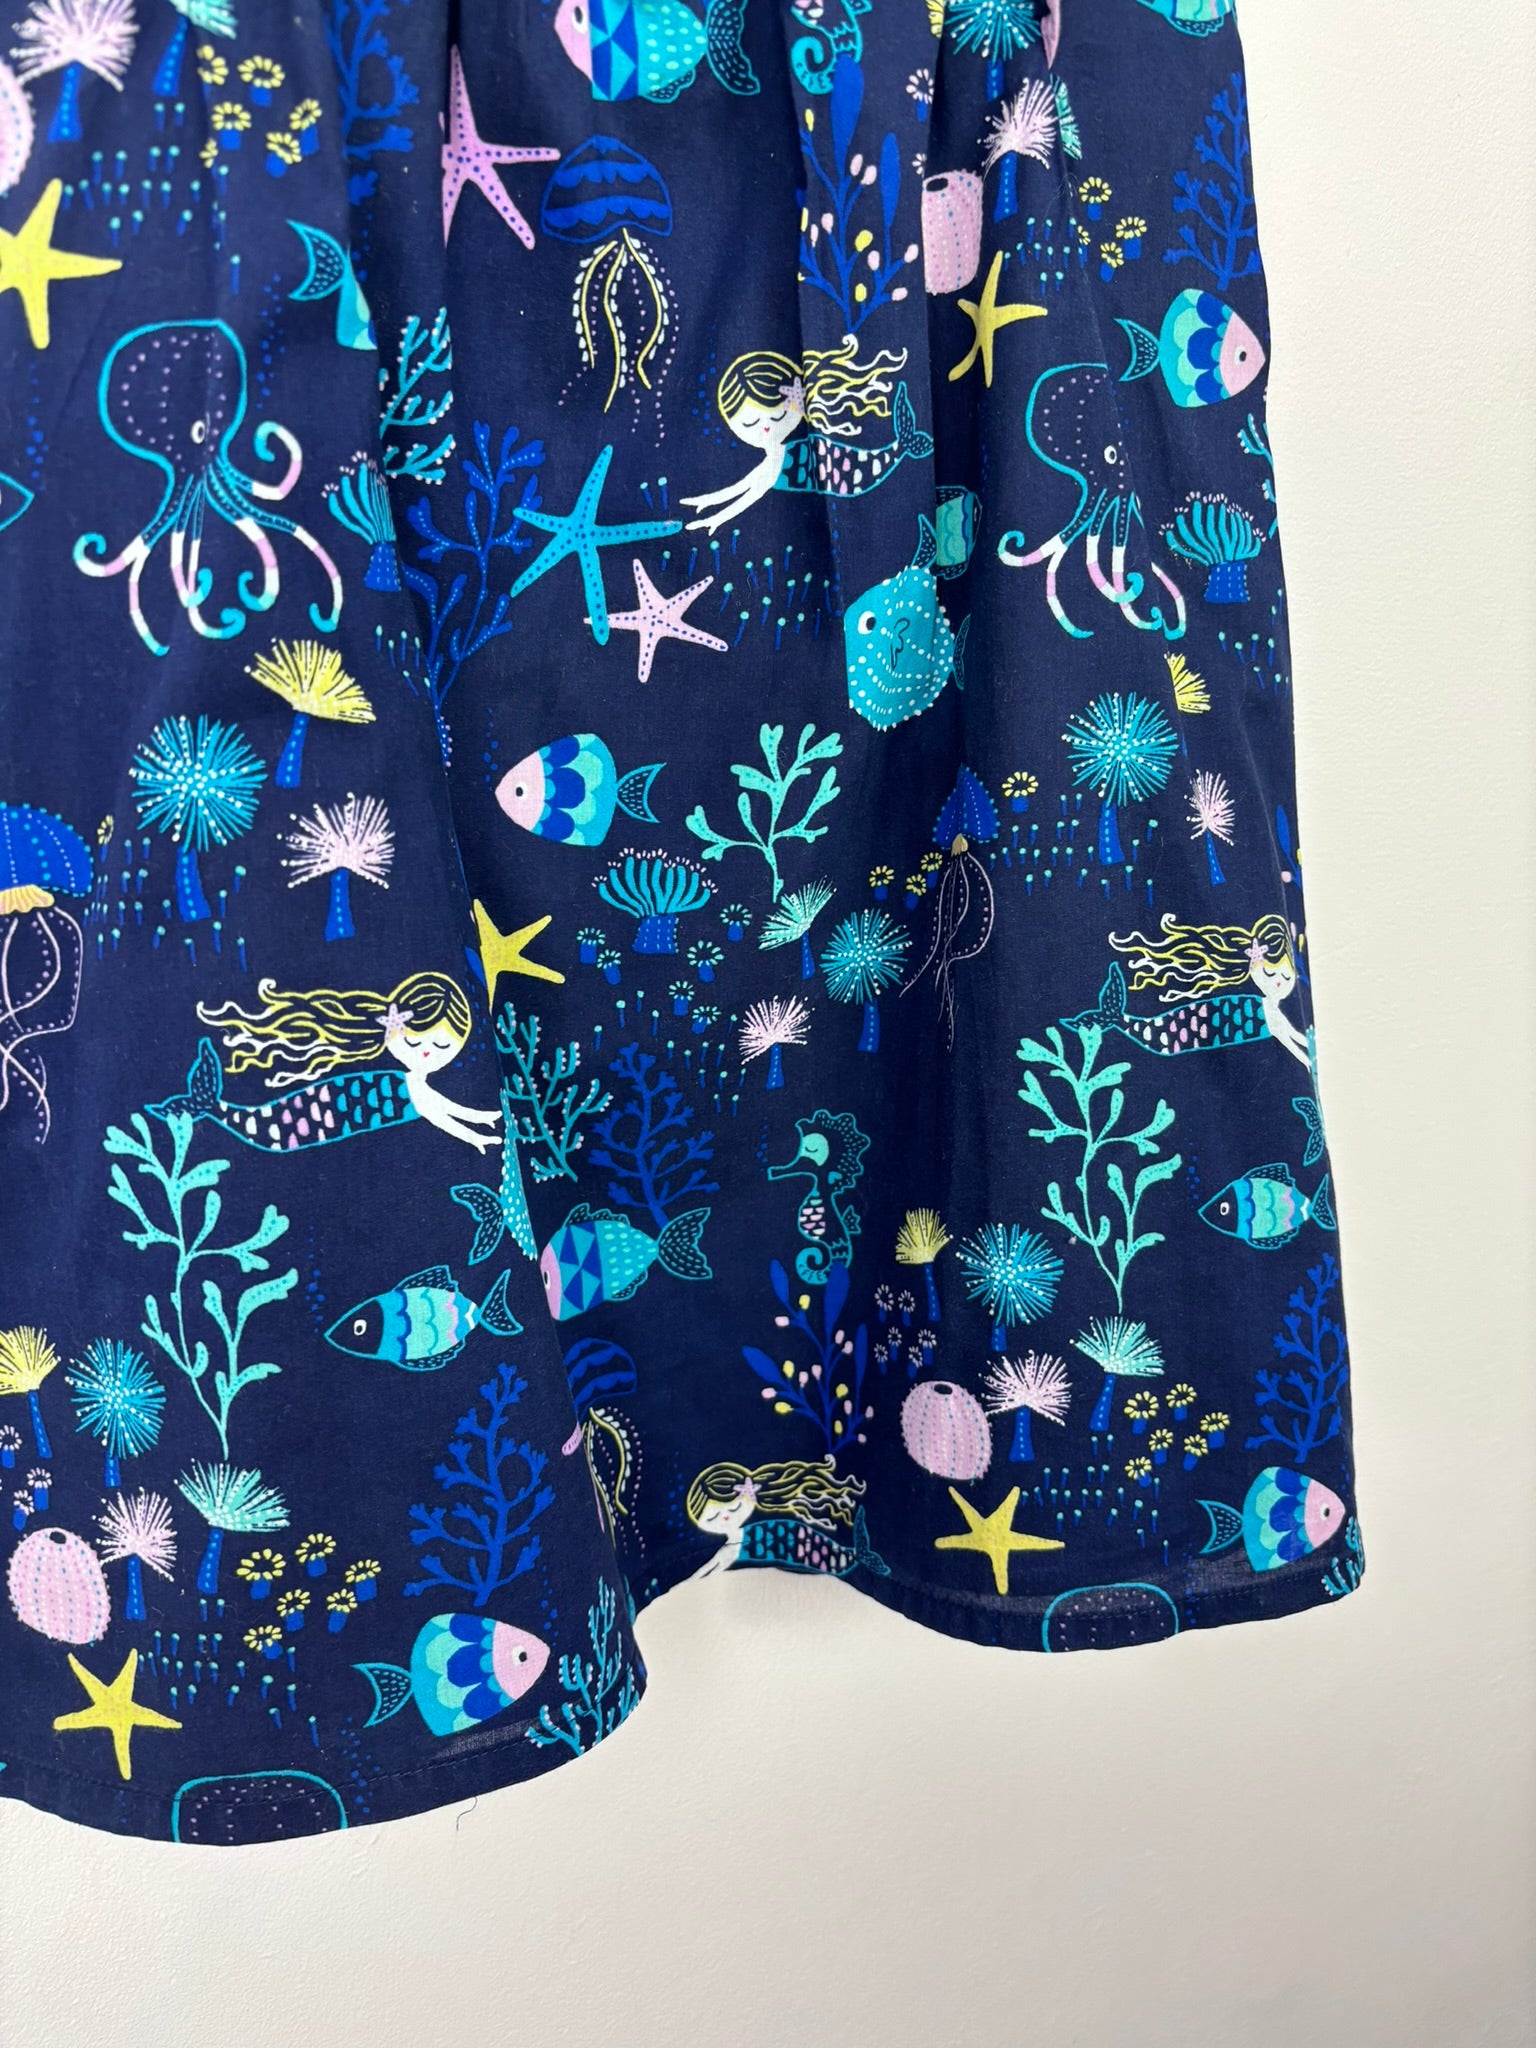 M&S 4-5 Years-Dresses-Second Snuggle Preloved